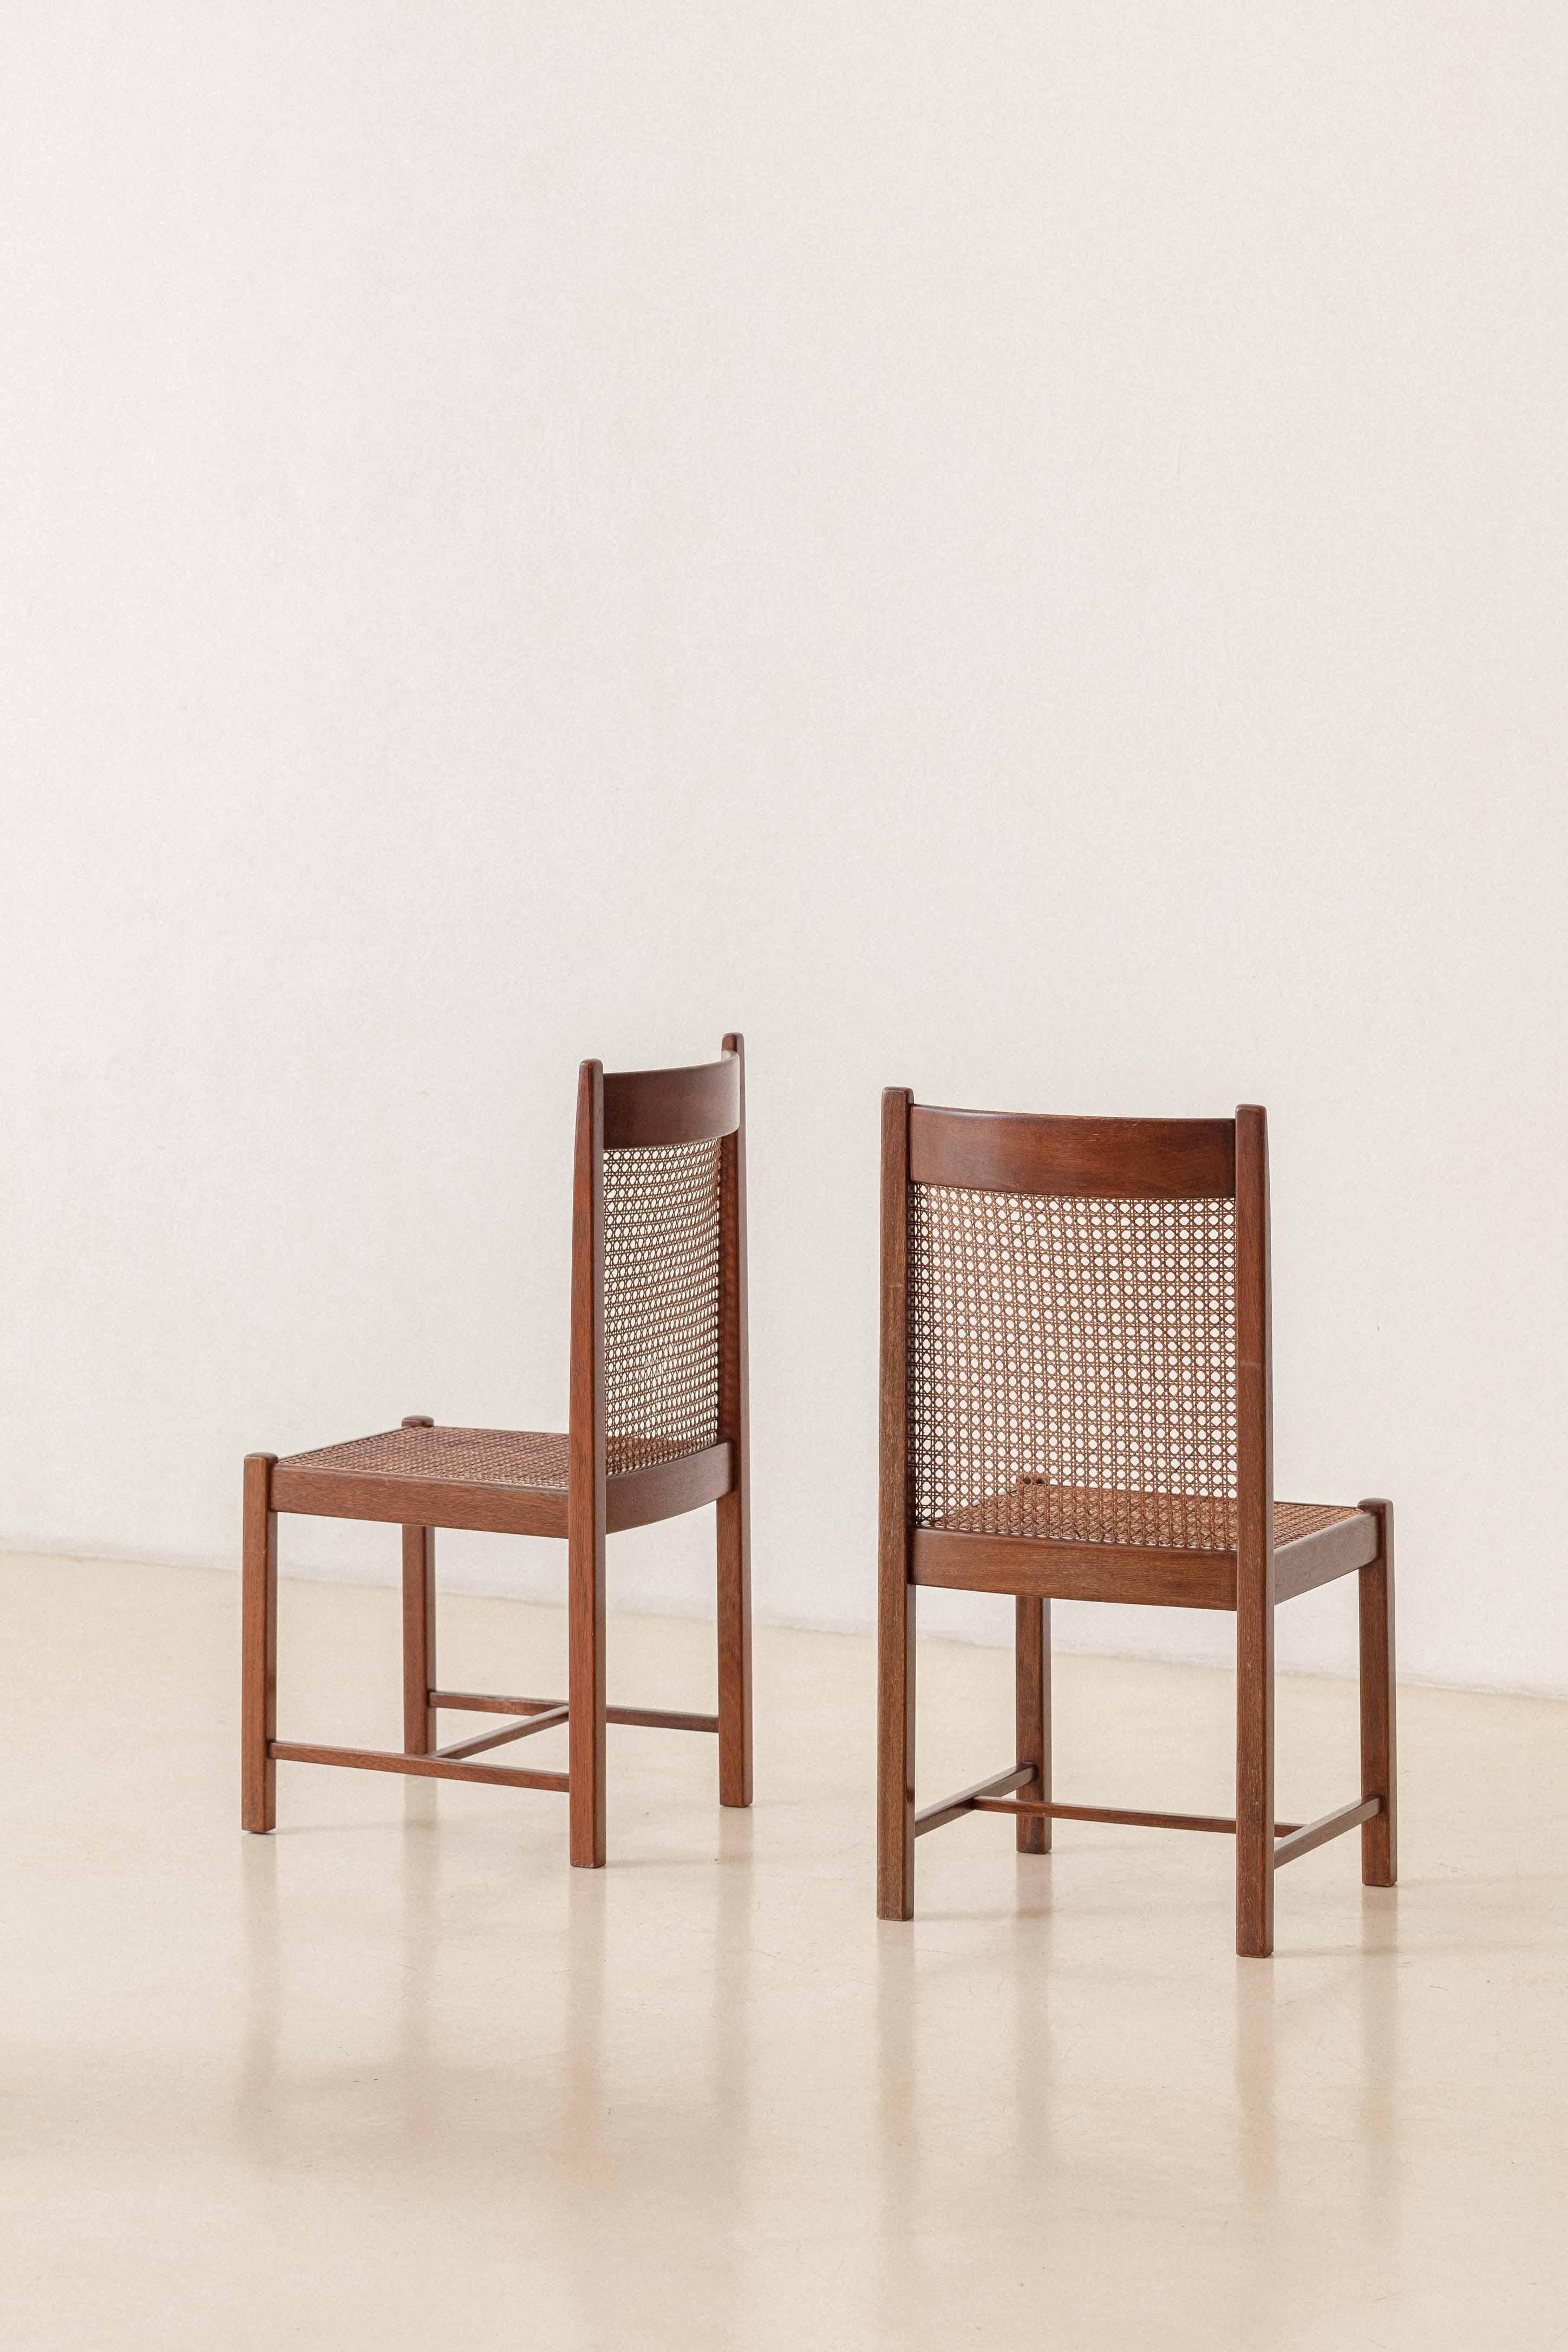 Mid-Century Modern Brazilian Rosewood Dining Chairs by Fatima Arquitetura Interiores 'FAI', 1960s For Sale